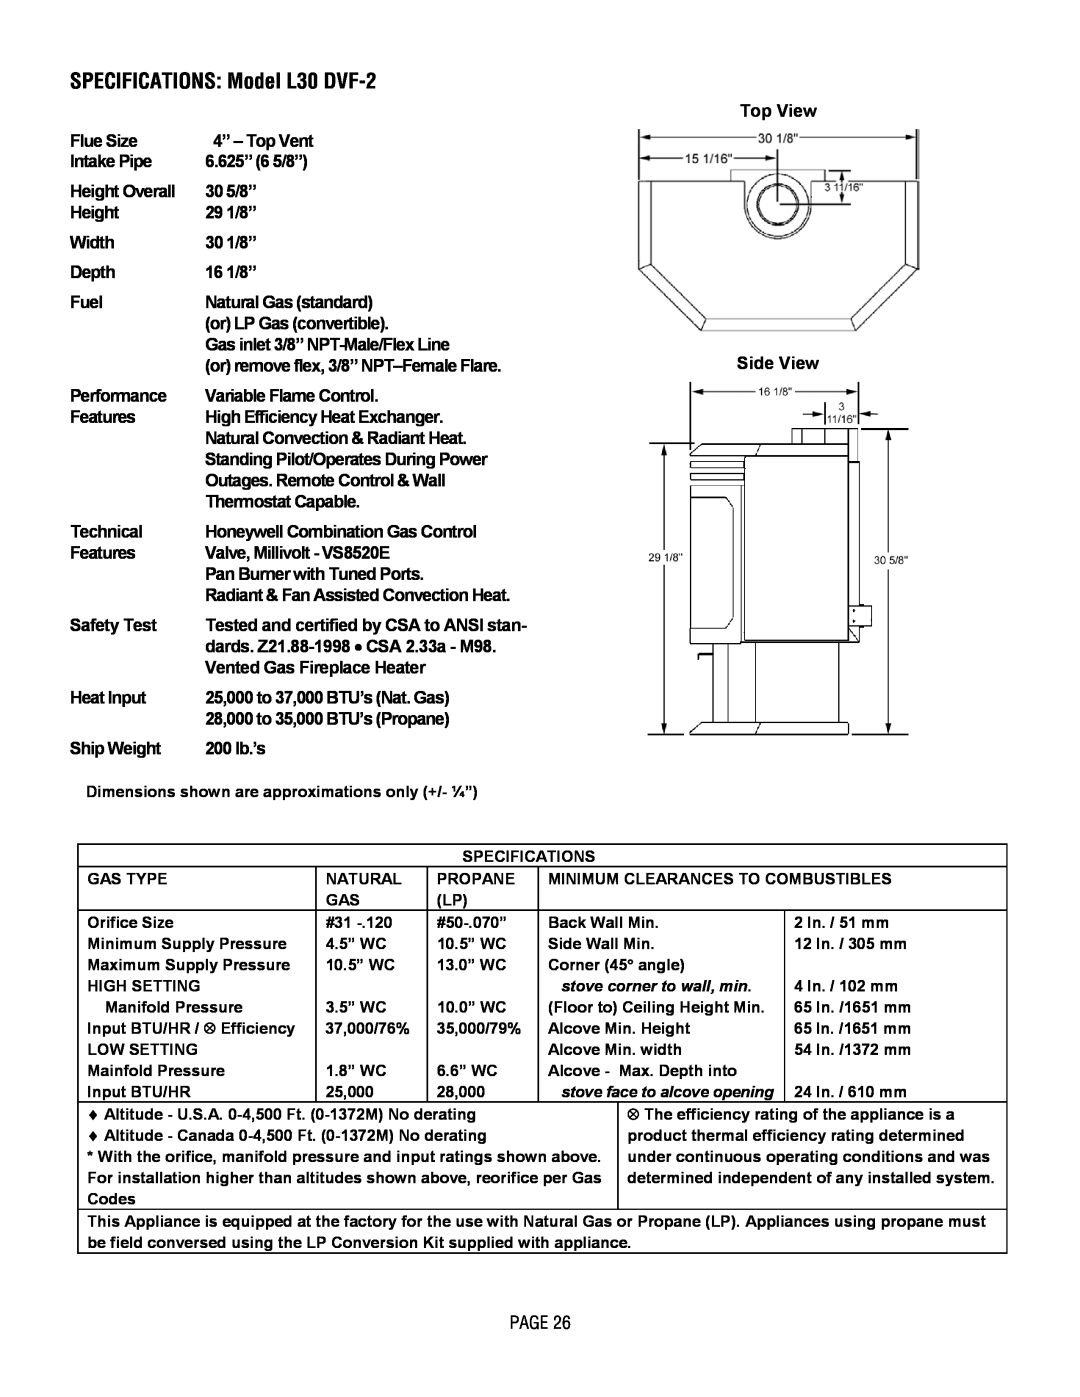 Lennox Hearth SPECIFICATIONS Model L30 DVF-2, Flue Size, 4” - Top Vent, Intake Pipe, 6.625” 6 5/8”, Height Overall 